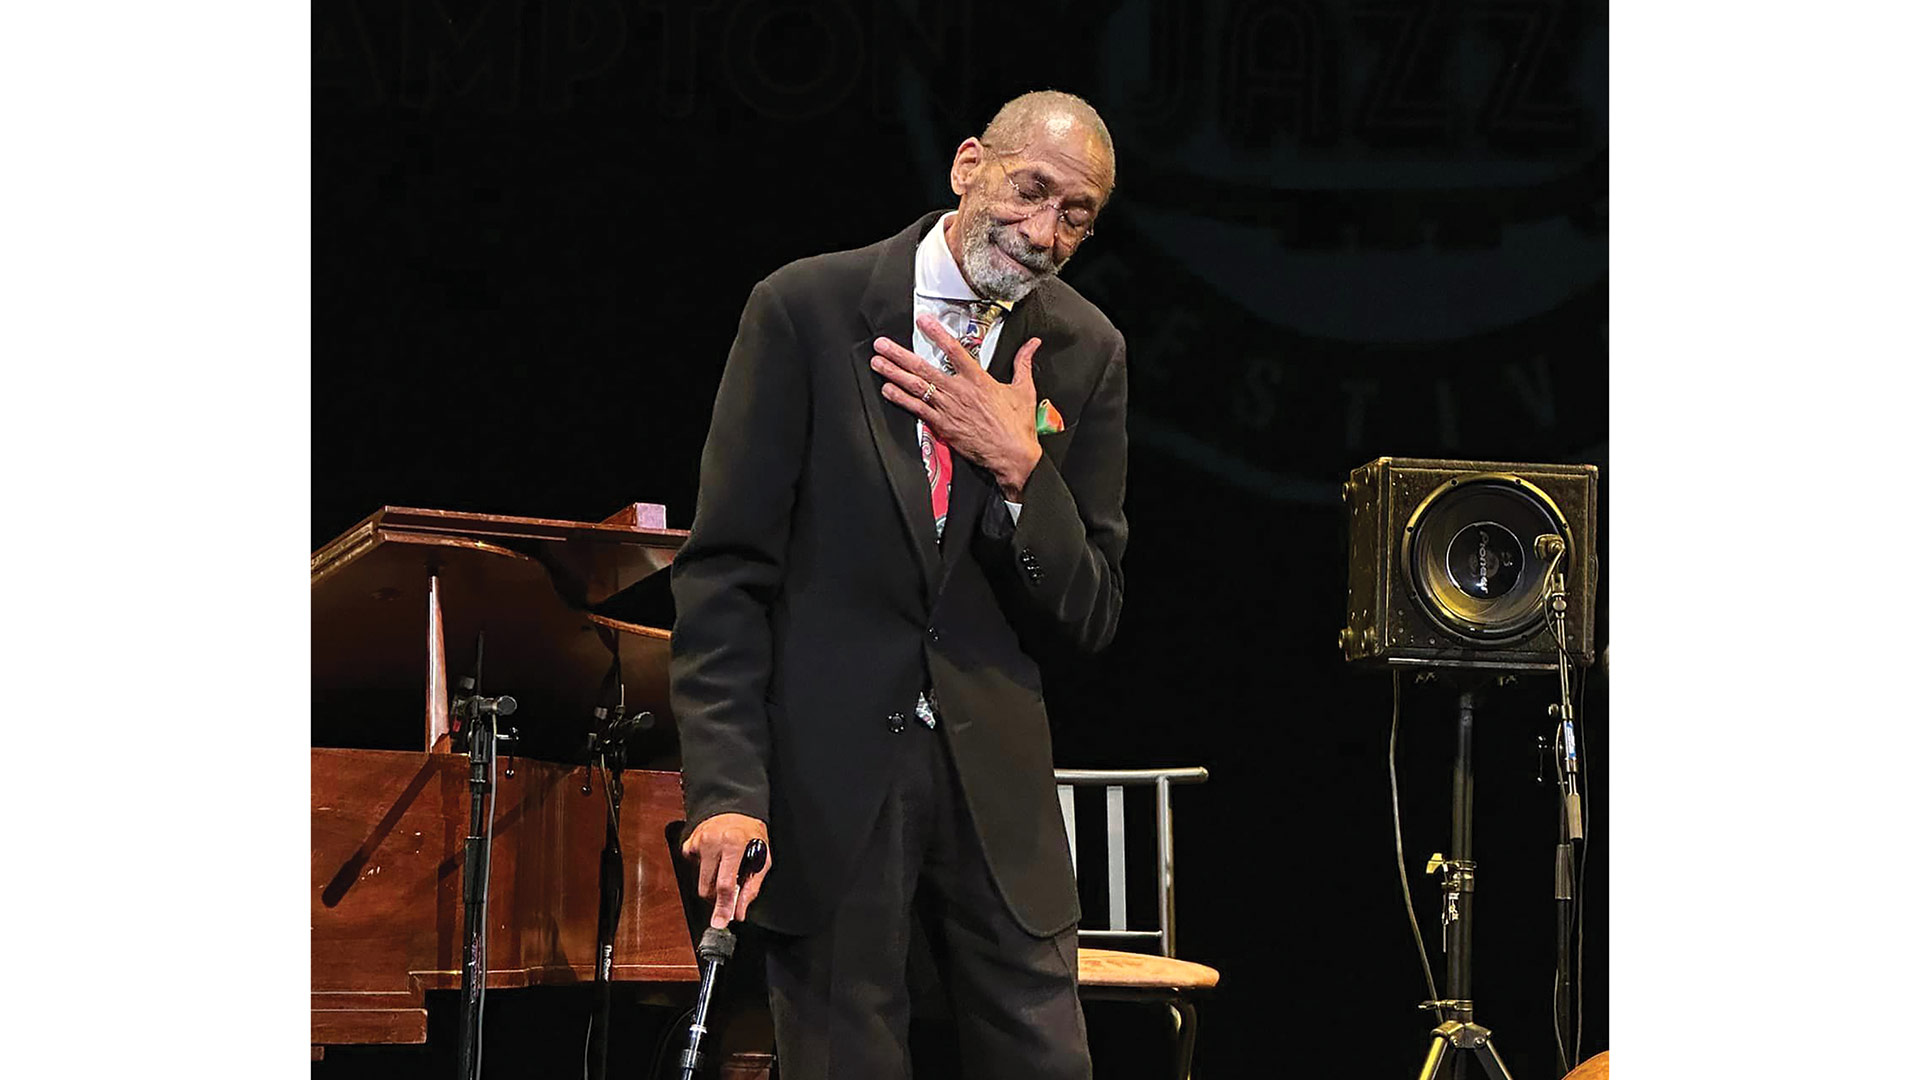 bassist and cellist Ron Carter